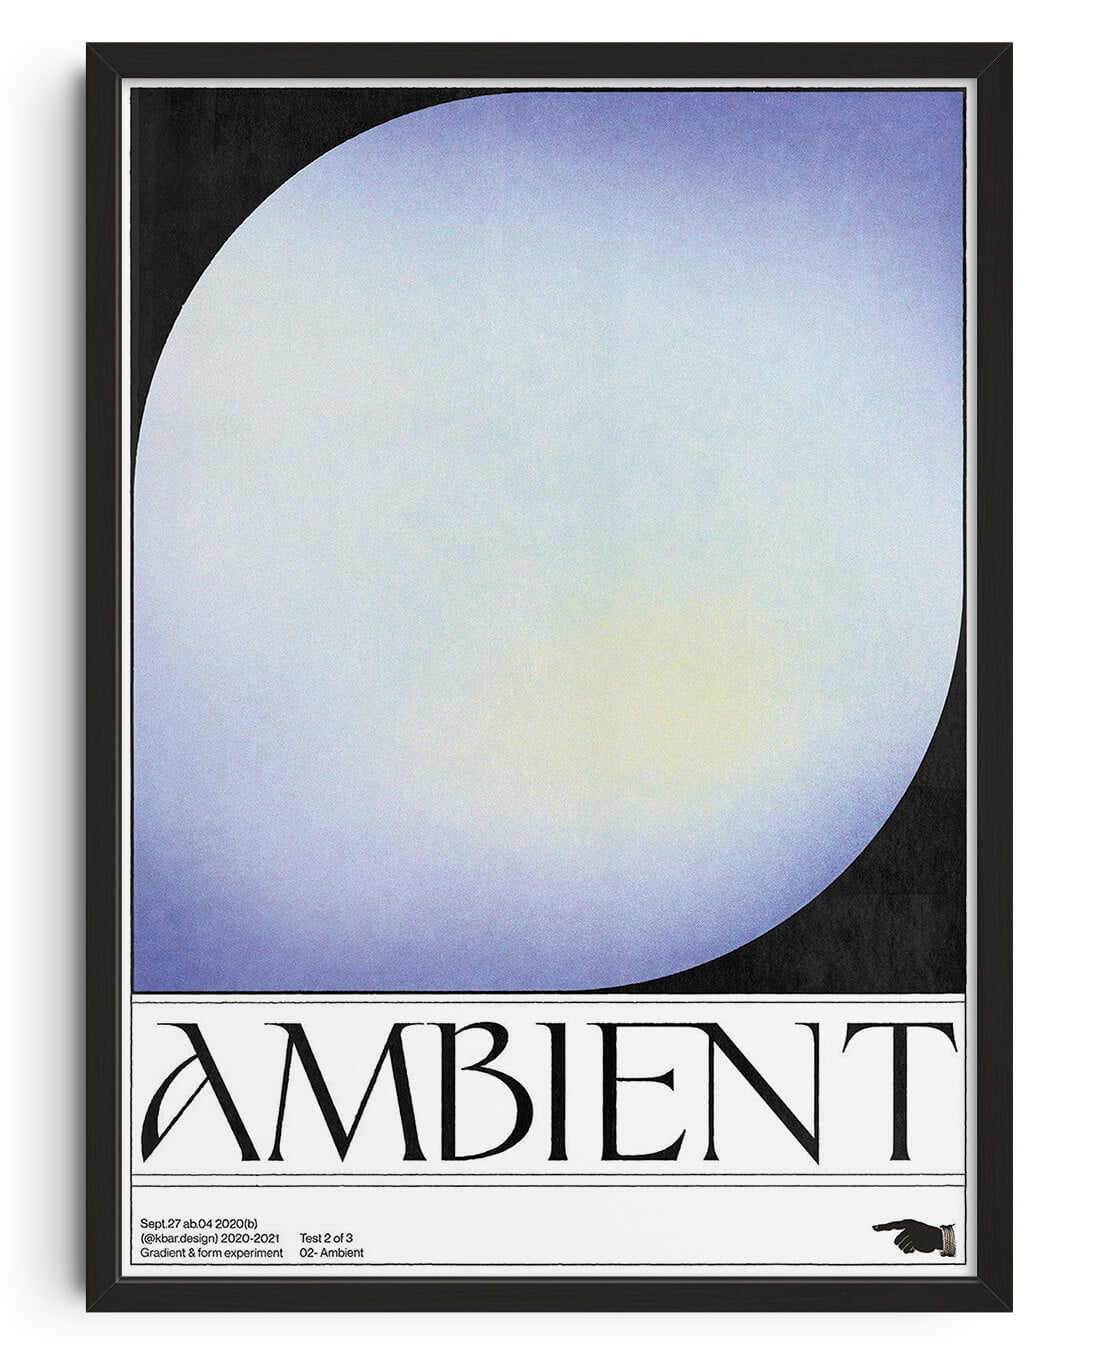 Ambient contemporary wall art print by Alexander Khabbazi - sold by DROOL